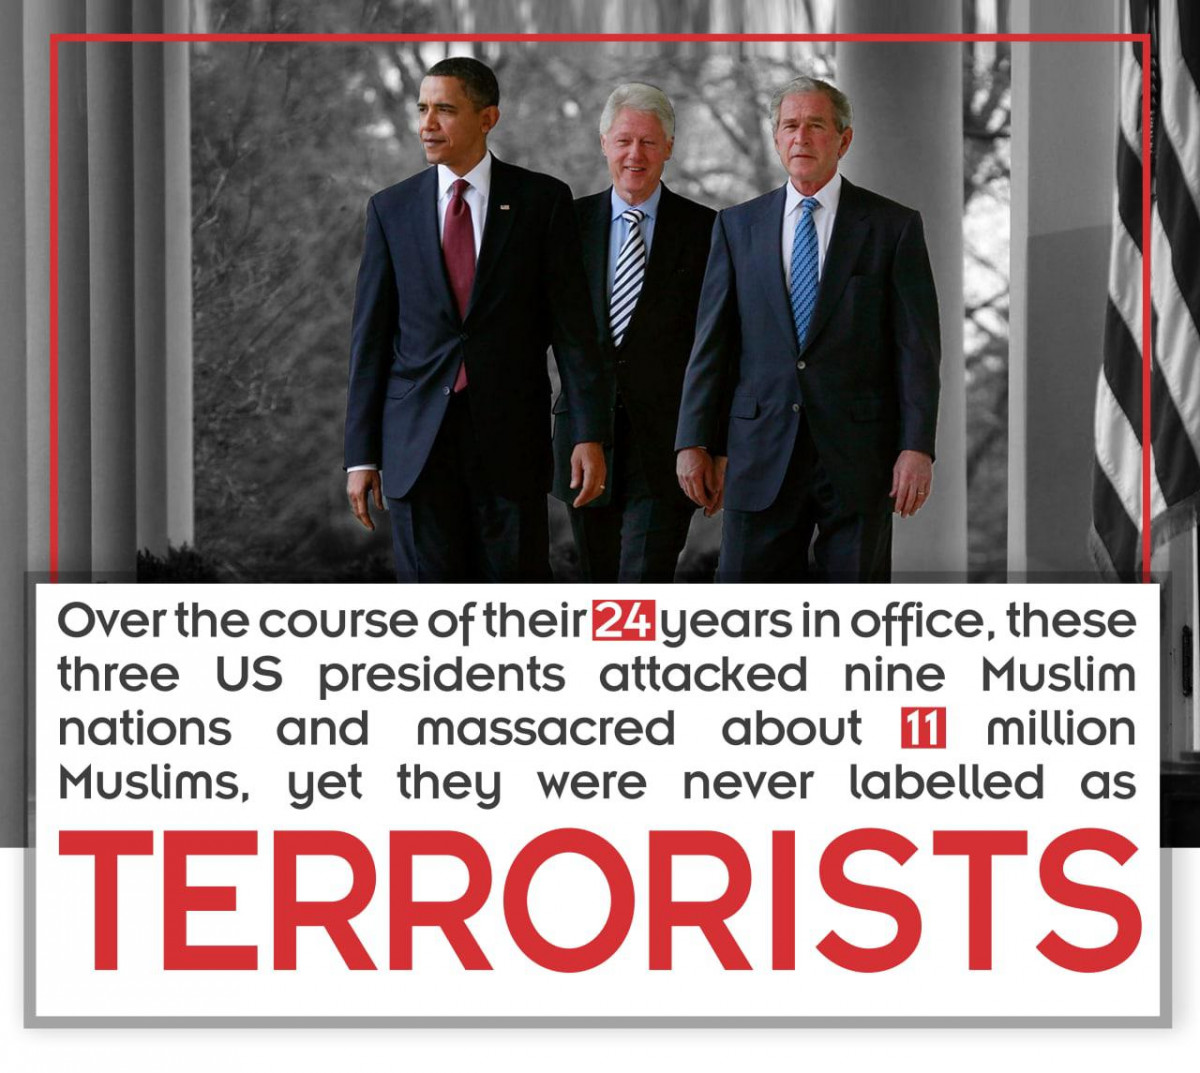 Over the course of their 24 years in office, these three US presidents attacked nine Muslim nations